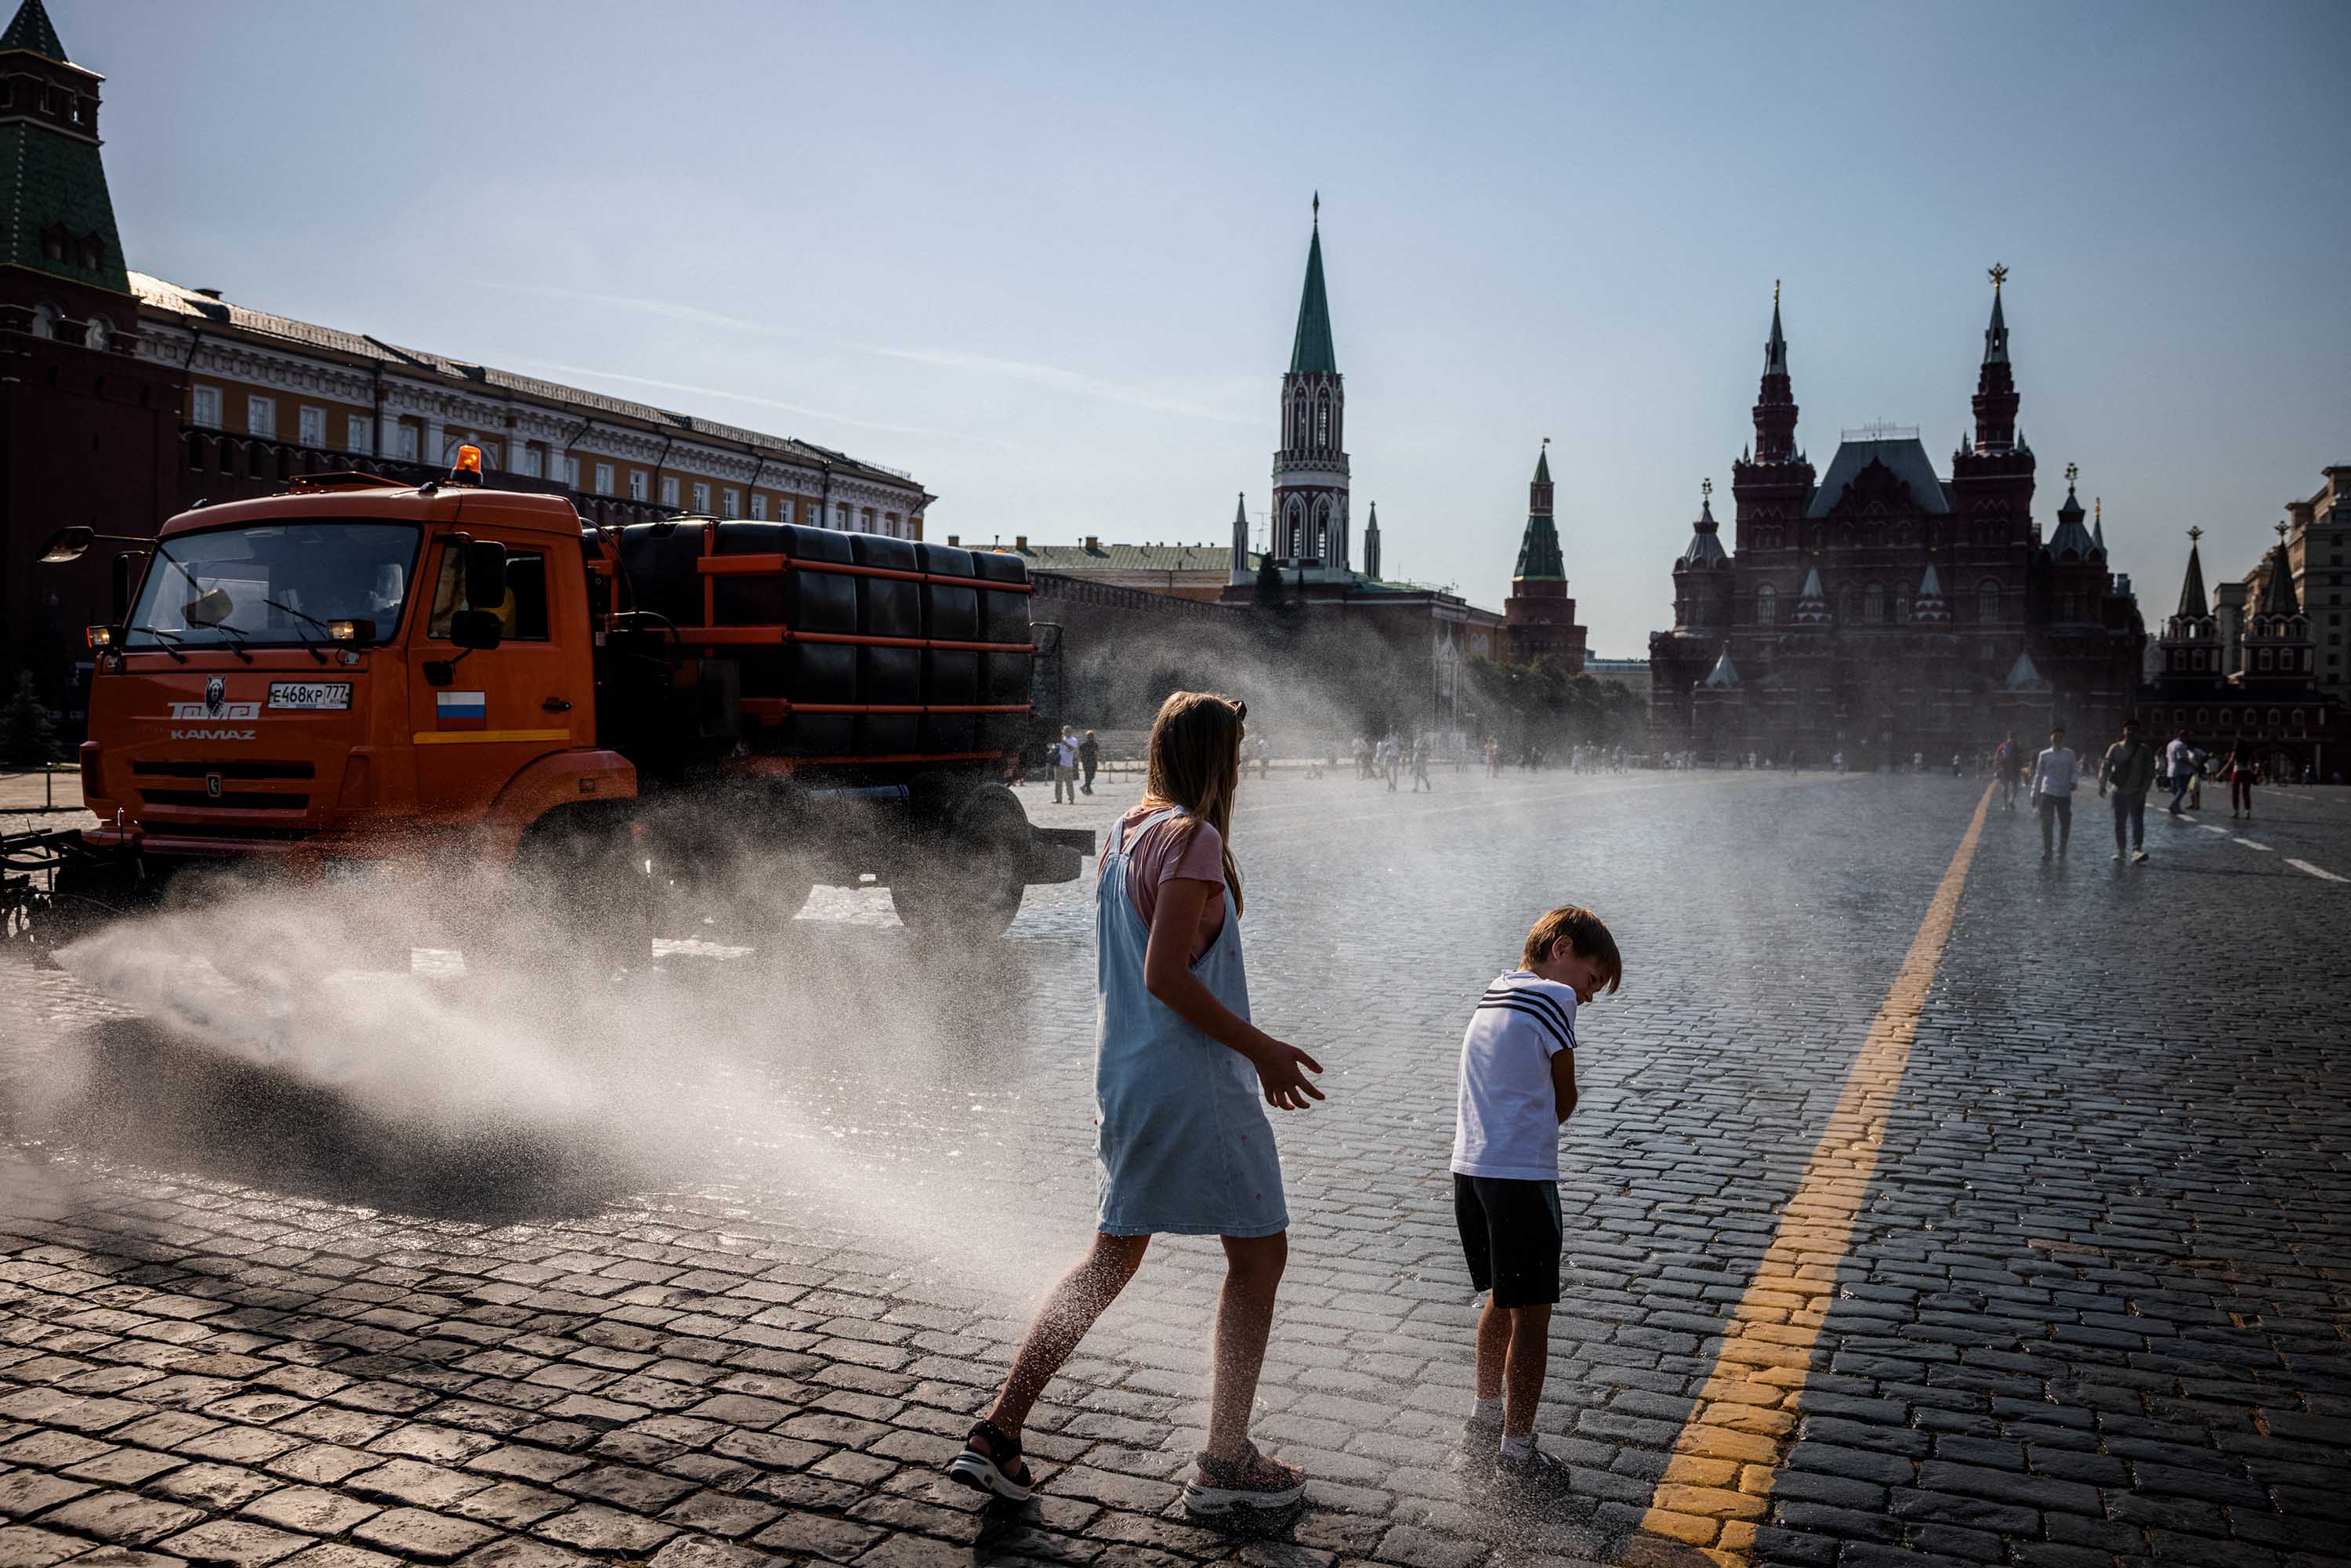 Nature can slow Russia's rapid warming. Don't expect the Kremlin to act.